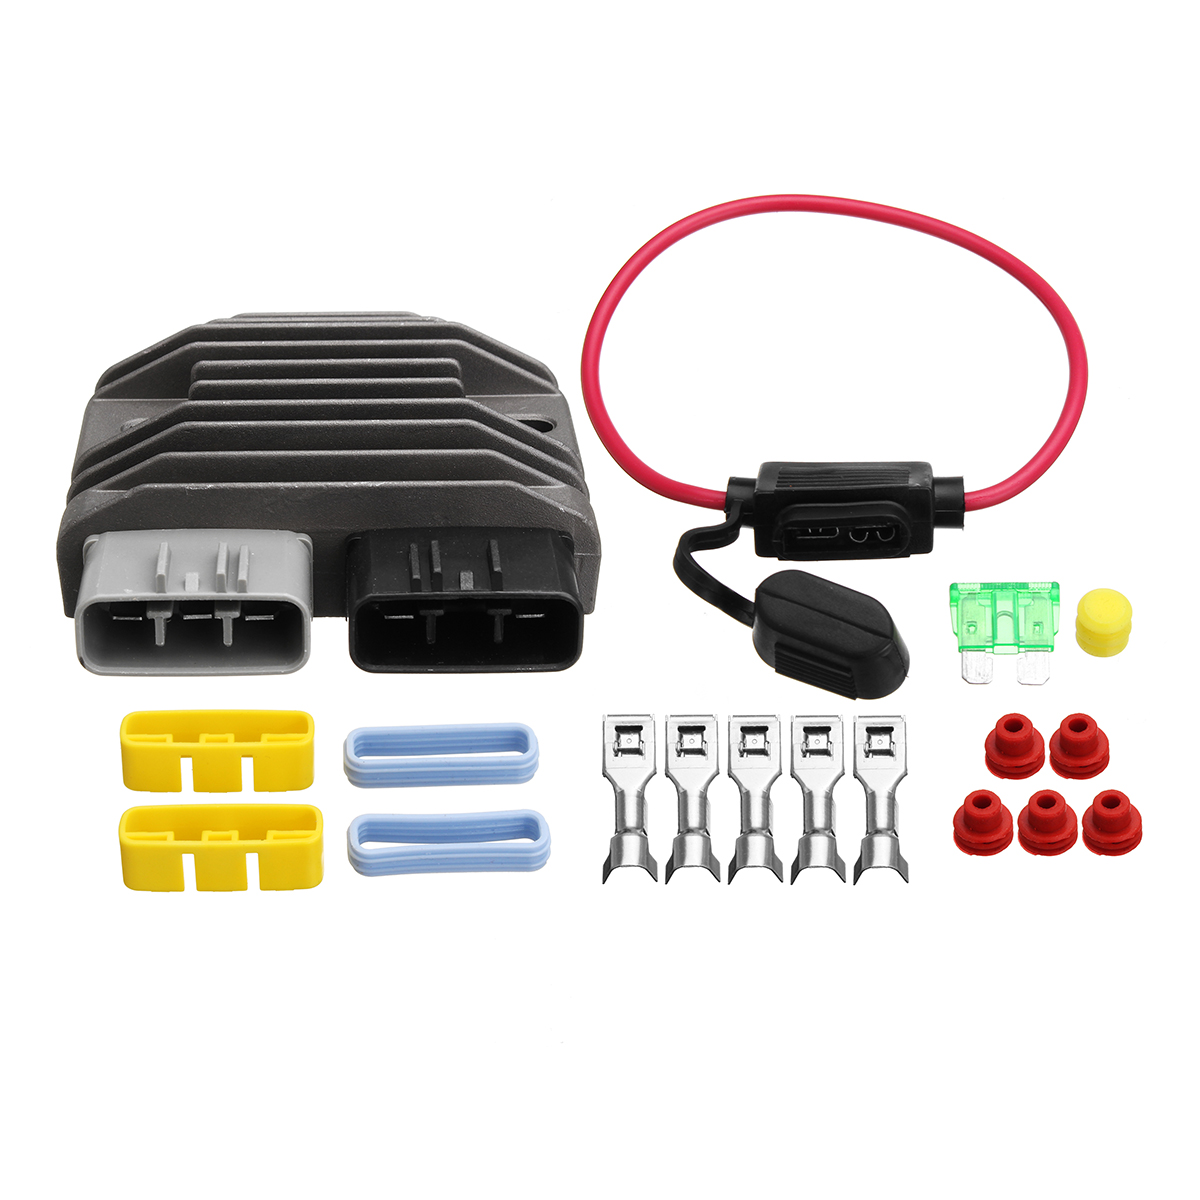 

MOSFET FH020AA Voltage Regulator + Rectifier Upgrade Kit Replace For SHINDENGEN FH012AA